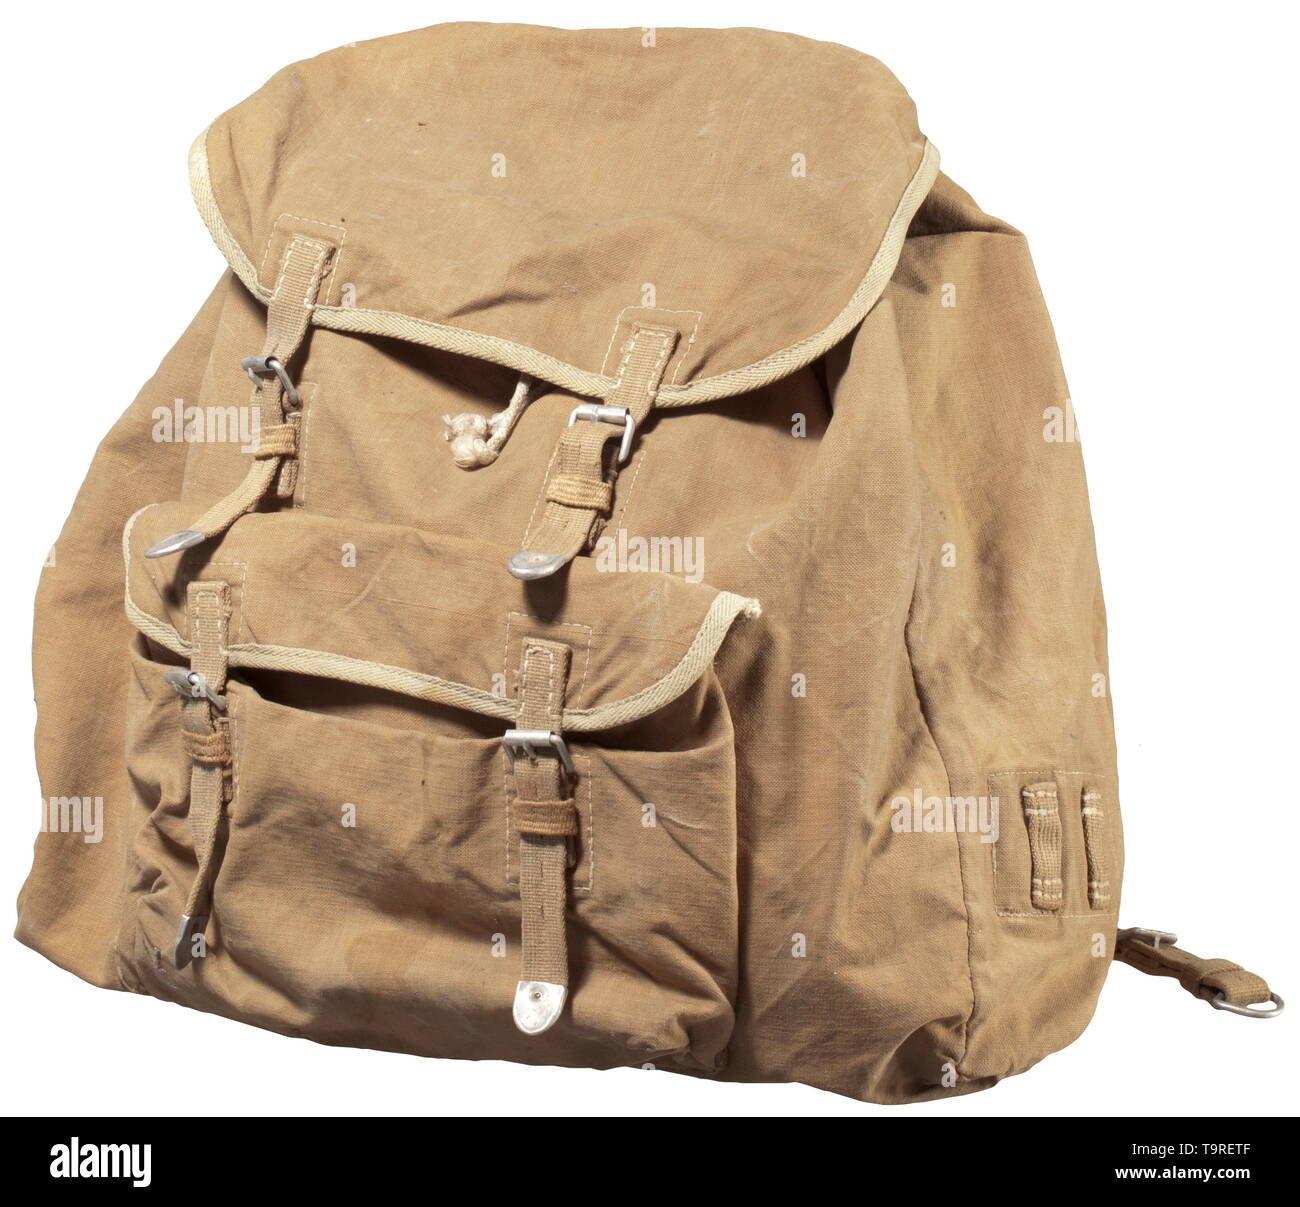 A rucksack of the Afrika Korps Sand-coloured linen with corresponding edging, web belting with aluminium parts, reverse superimposed pocket, on each side two fastening loops, inside a utensil pocket. historic, historical, 20th century, Additional-Rights-Clearance-Info-Not-Available Stock Photo